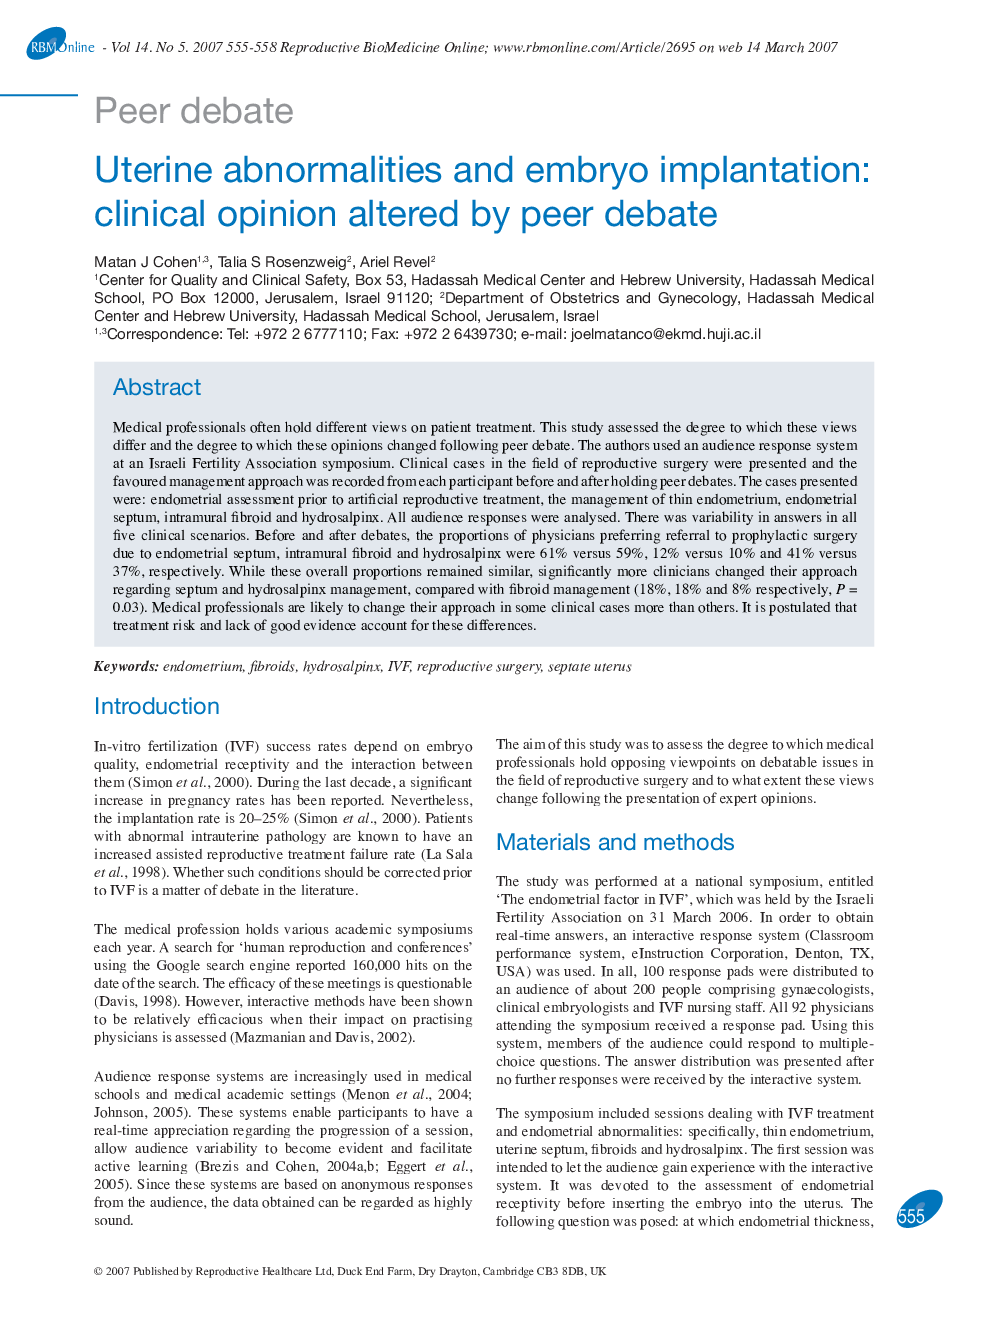 Uterine abnormalities and embryo implantation: clinical opinion altered by peer debate